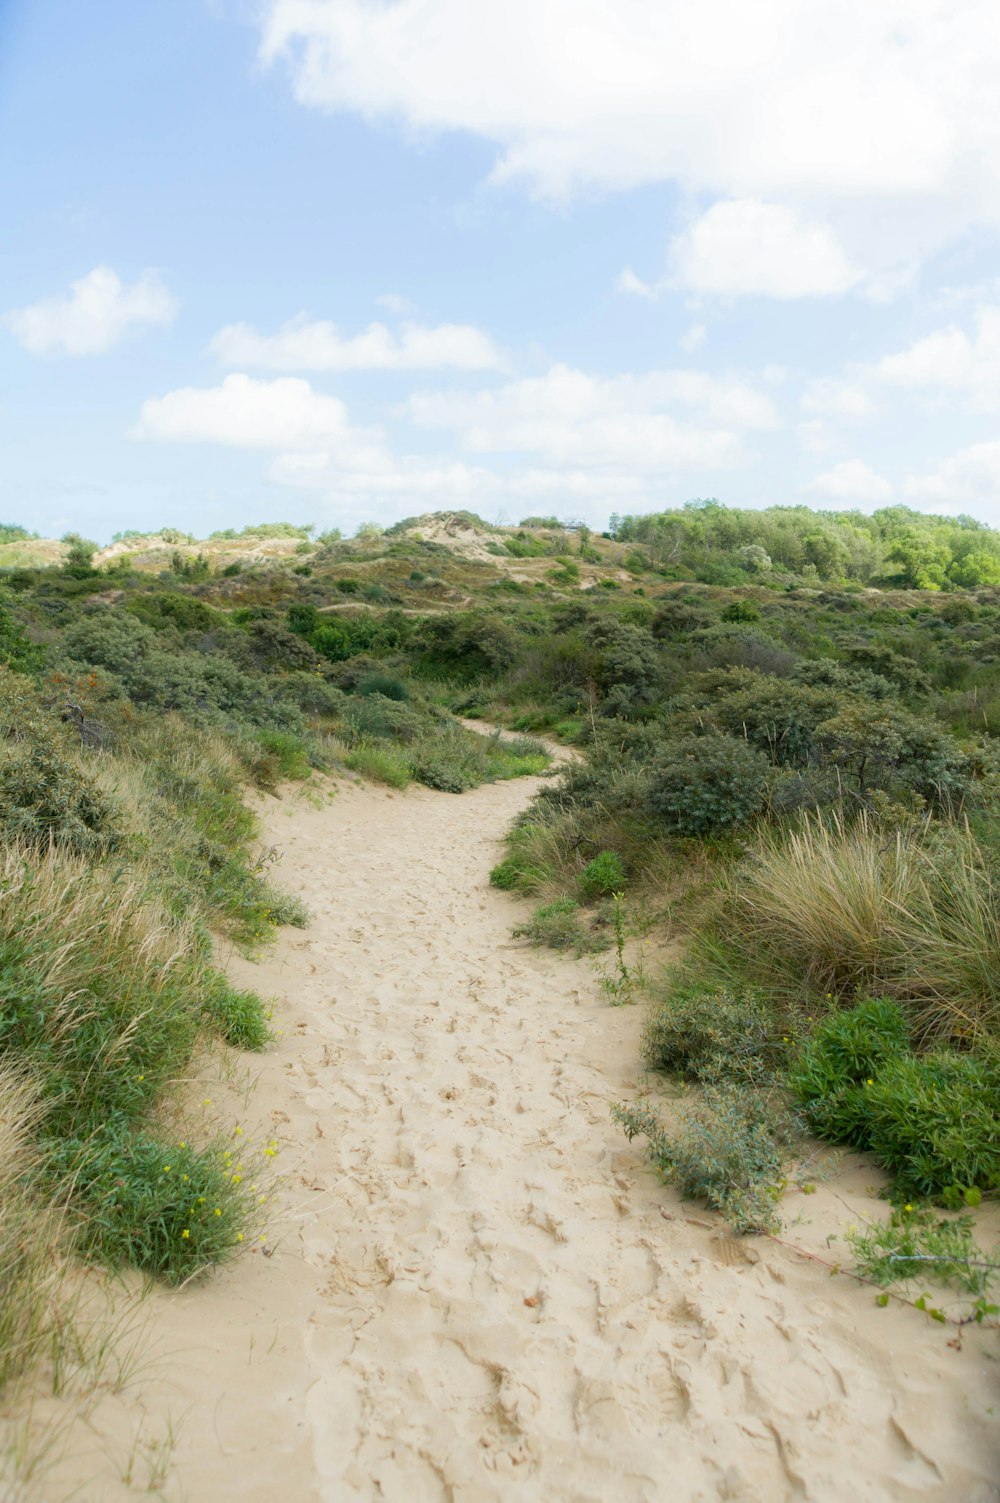 a sandy path in the middle of a grassy area